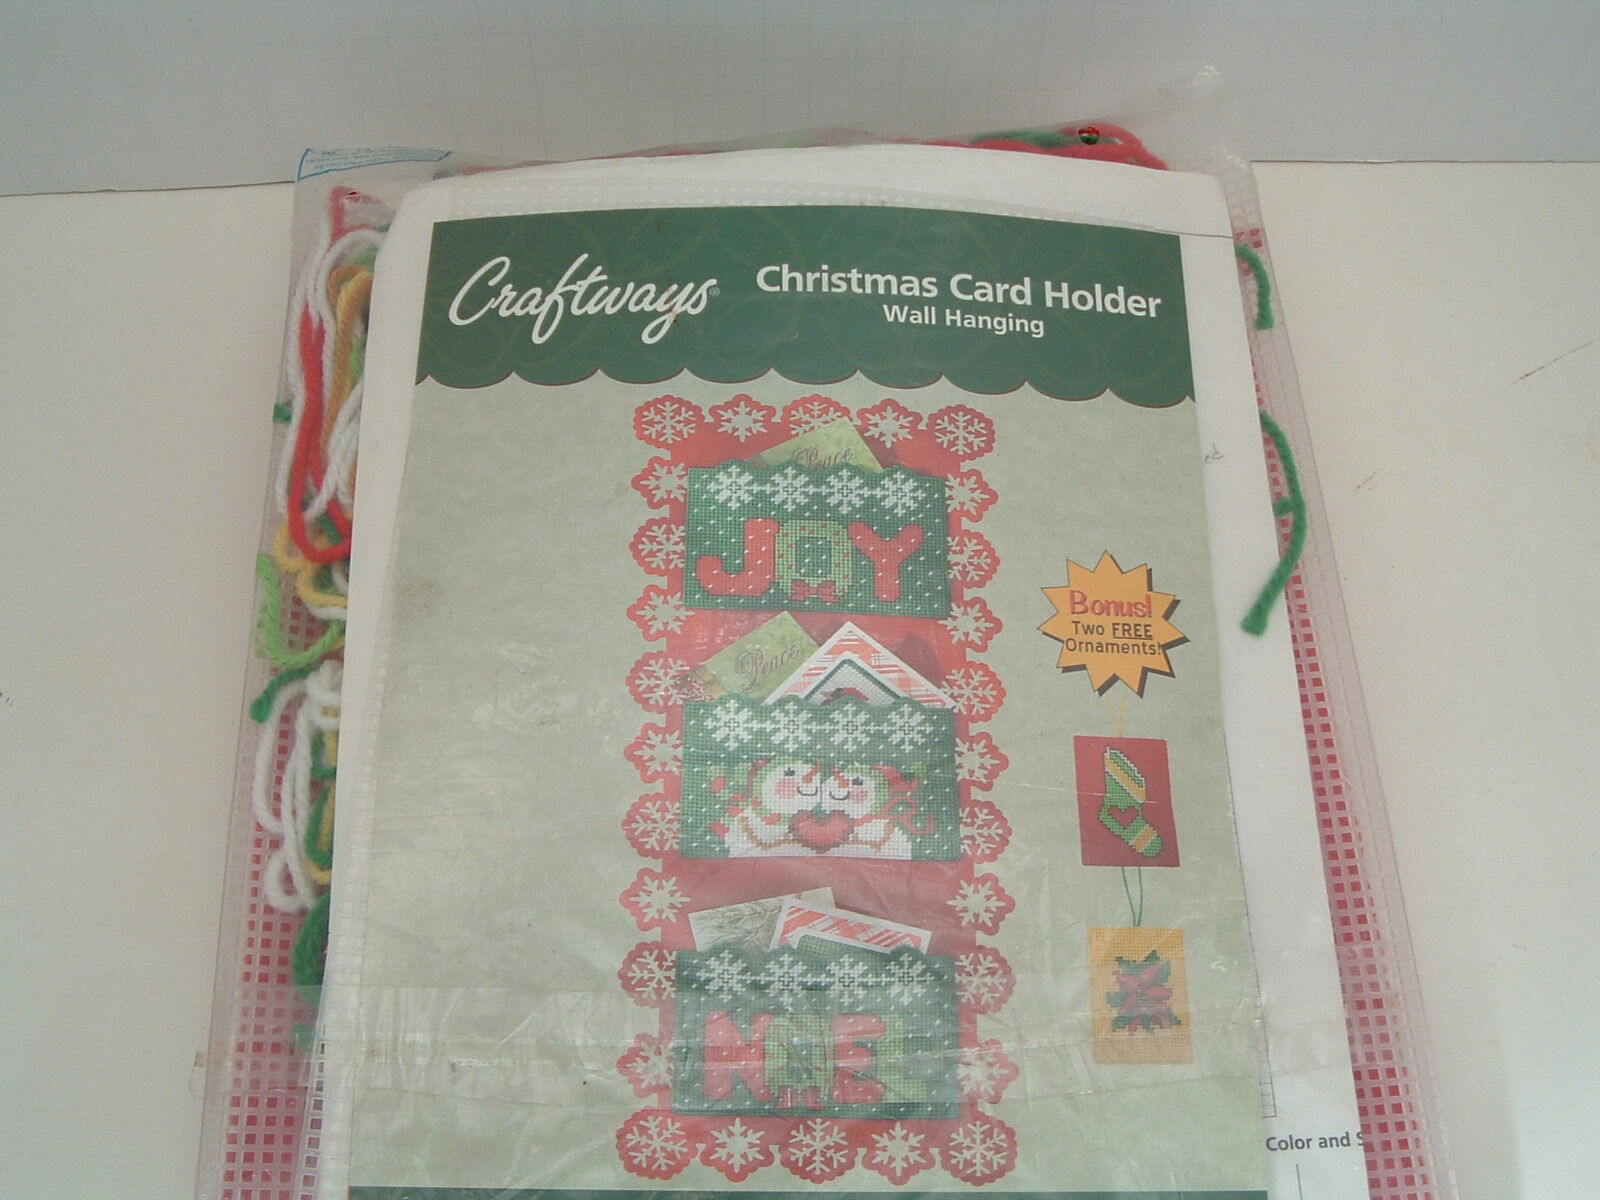 Christmas card holder wall hanging plastic canvas kit  craftways brand  - $19.75